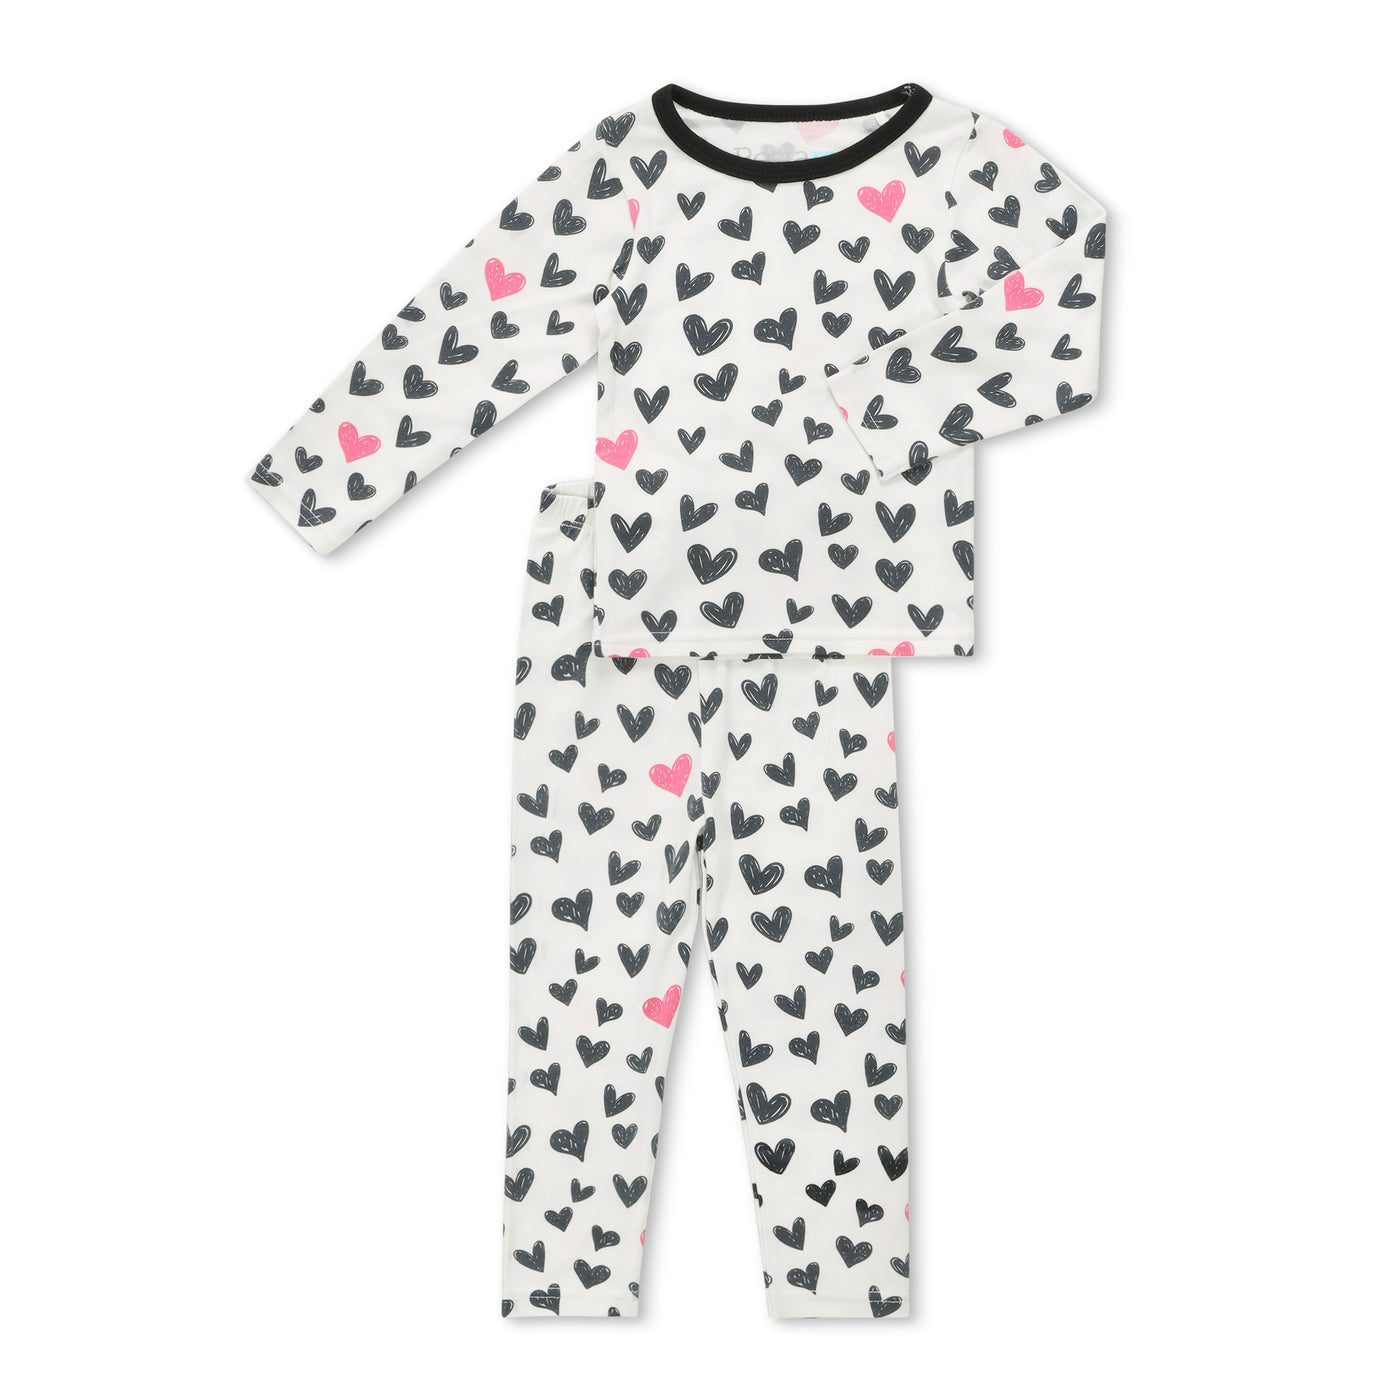 From the Heart Pajamas